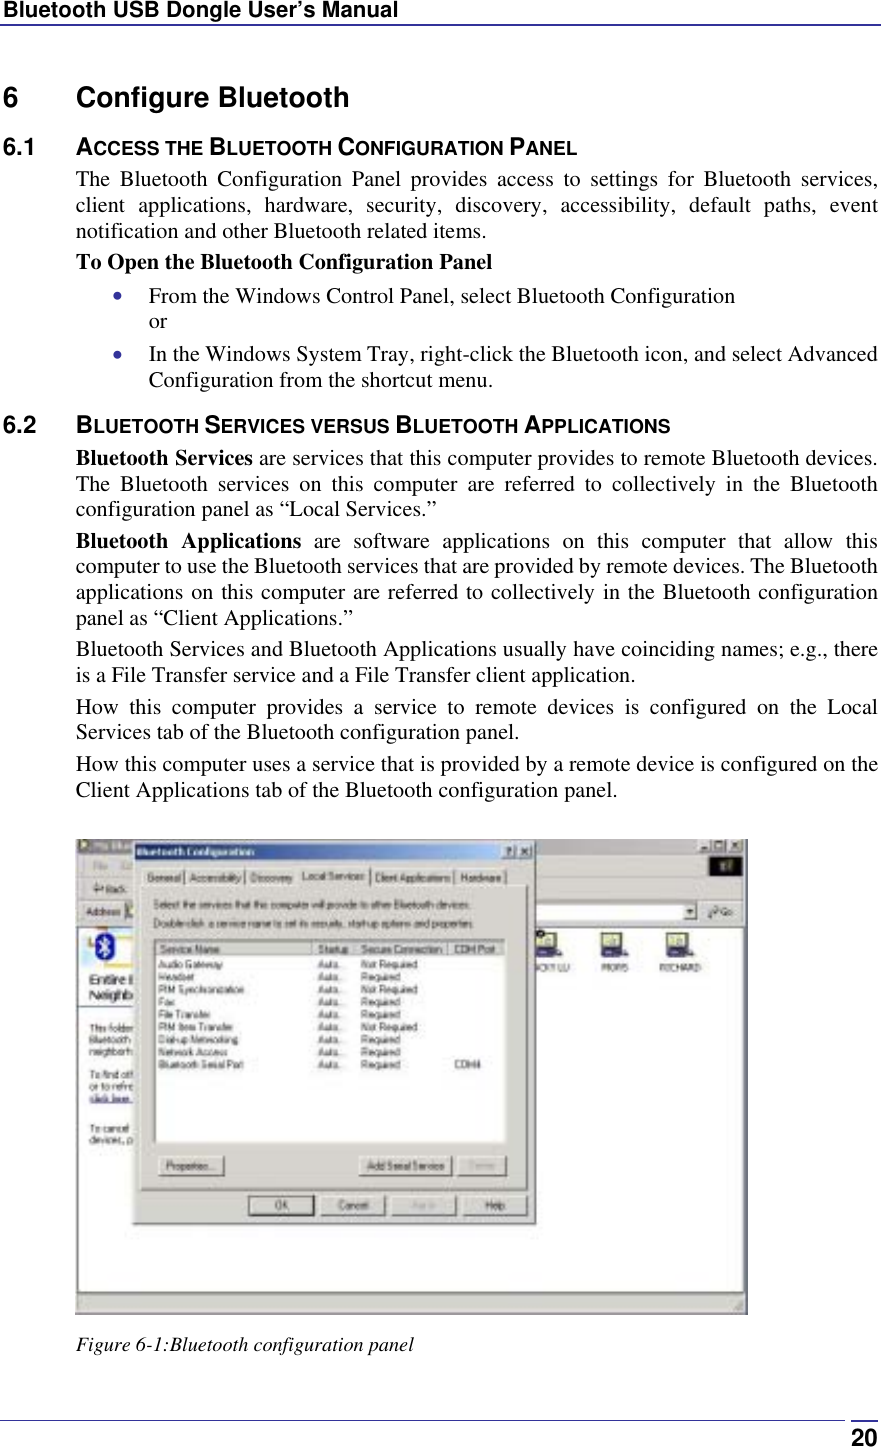 Bluetooth USB Dongle User’s Manual  206 Configure Bluetooth 6.1 ACCESS THE BLUETOOTH CONFIGURATION PANEL The Bluetooth Configuration Panel provides access to settings for Bluetooth services, client applications, hardware, security, discovery, accessibility, default paths, event notification and other Bluetooth related items. To Open the Bluetooth Configuration Panel •  From the Windows Control Panel, select Bluetooth Configuration or •  In the Windows System Tray, right-click the Bluetooth icon, and select Advanced Configuration from the shortcut menu. 6.2 BLUETOOTH SERVICES VERSUS BLUETOOTH APPLICATIONS Bluetooth Services are services that this computer provides to remote Bluetooth devices. The Bluetooth services on this computer are referred to collectively in the Bluetooth configuration panel as “Local Services.” Bluetooth Applications are software applications on this computer that allow this computer to use the Bluetooth services that are provided by remote devices. The Bluetooth applications on this computer are referred to collectively in the Bluetooth configuration panel as “Client Applications.” Bluetooth Services and Bluetooth Applications usually have coinciding names; e.g., there is a File Transfer service and a File Transfer client application. How this computer provides a service to remote devices is configured on the Local Services tab of the Bluetooth configuration panel. How this computer uses a service that is provided by a remote device is configured on the Client Applications tab of the Bluetooth configuration panel.   Figure 6-1:Bluetooth configuration panel 